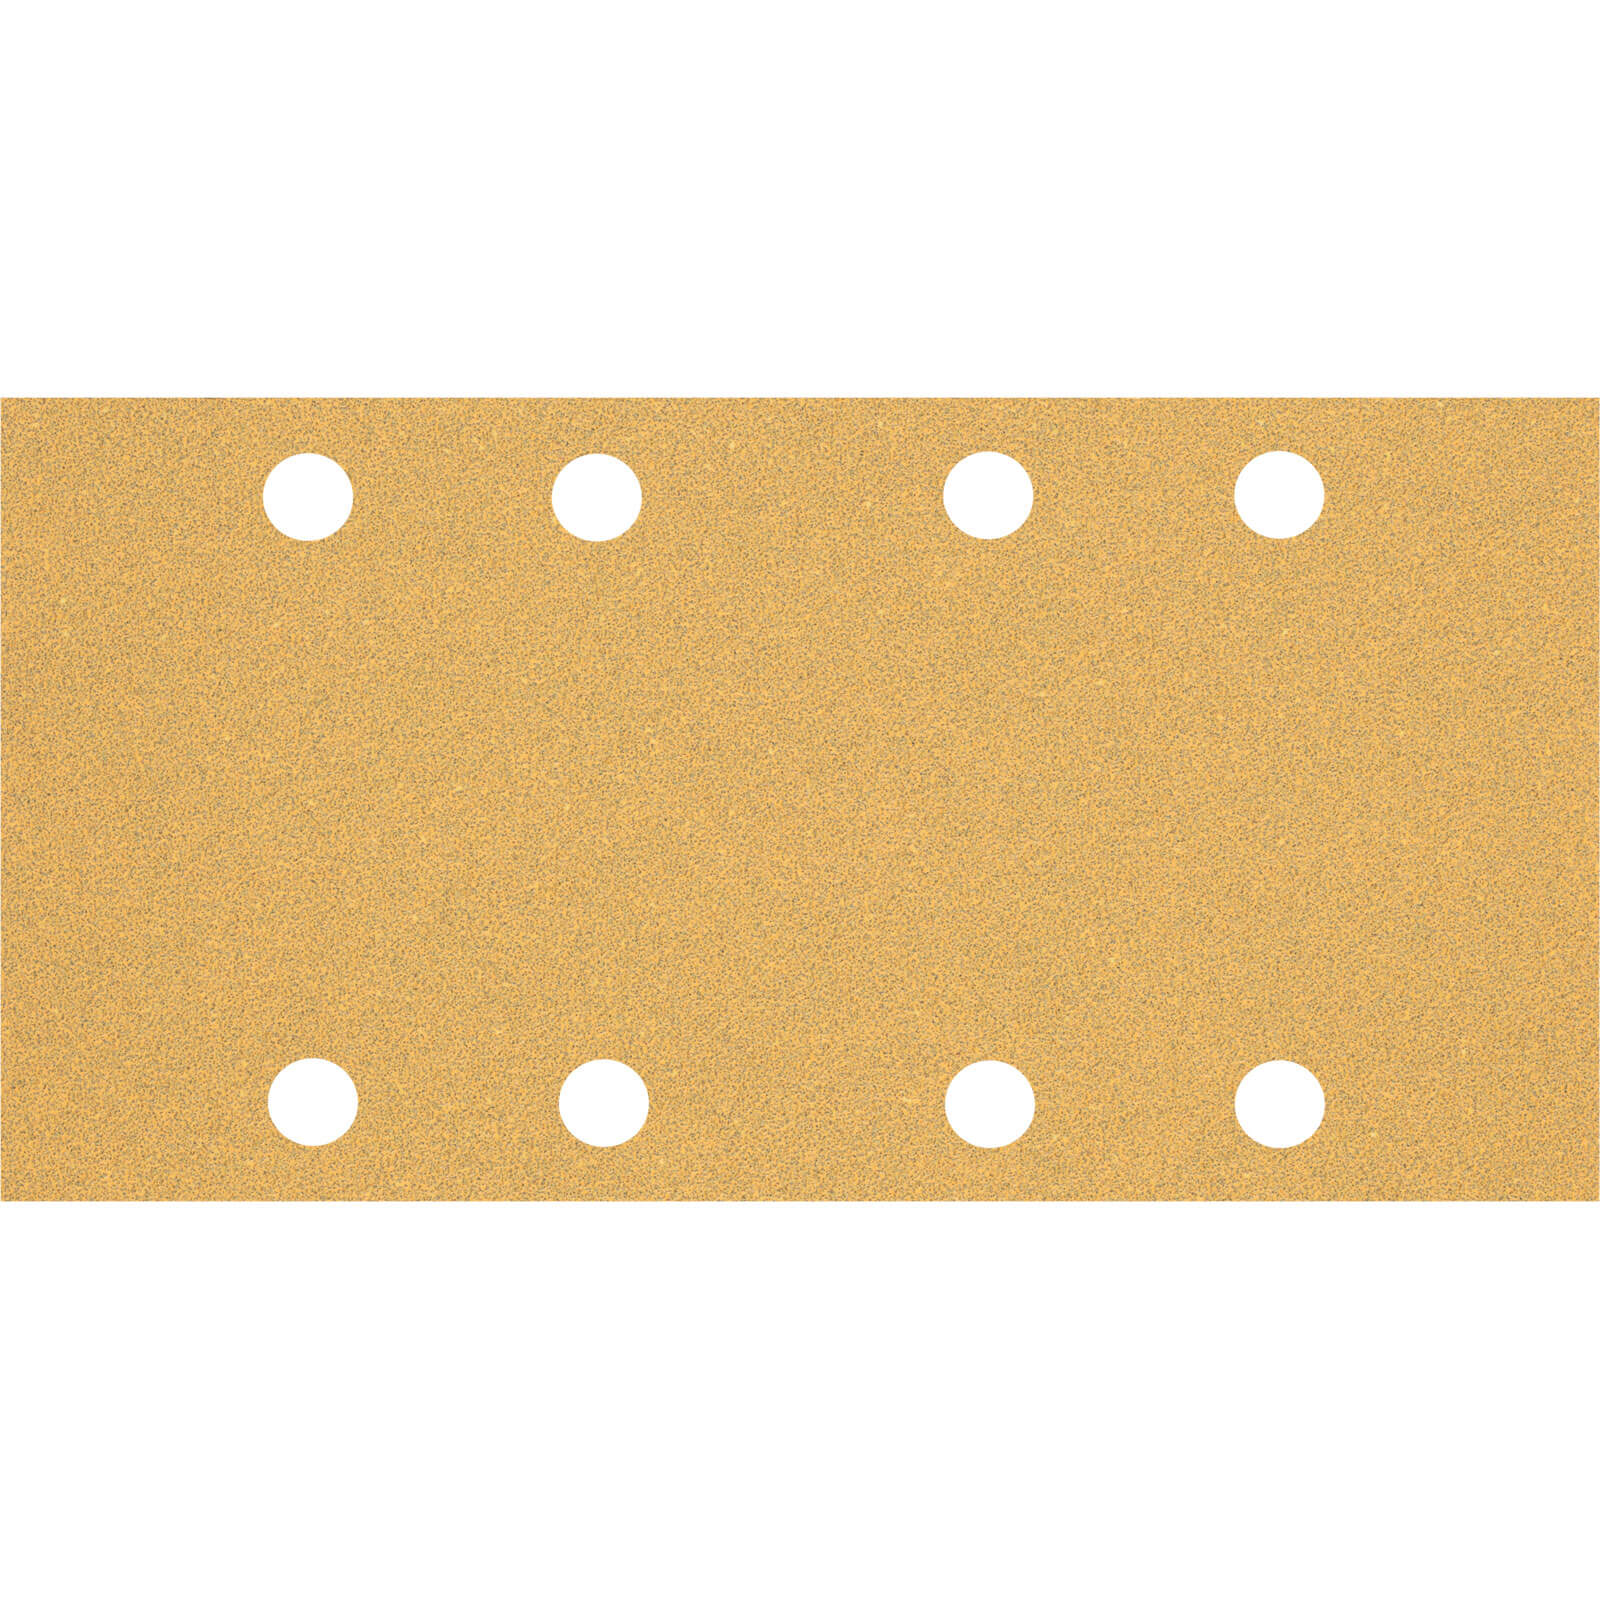 Image of Bosch Expert C470 Punched Hook and Loop Sanding Sheets 93mm x 186mm 60g Pack of 50